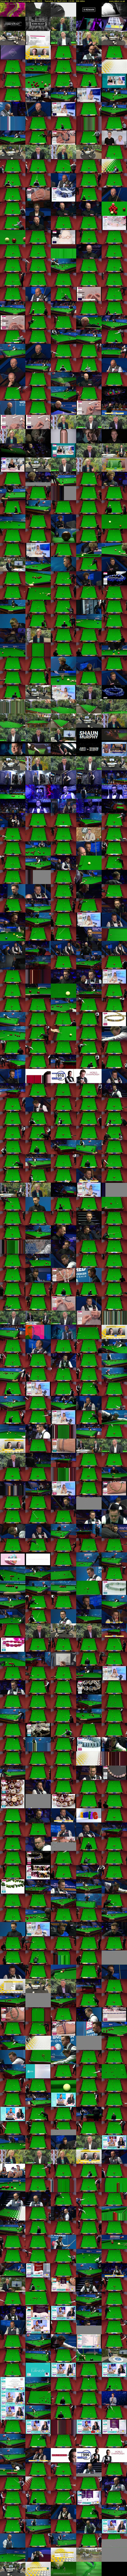 Snooker: World Championship (BBC TWO) Tuesday 27 April 2021 13:00 - 18:00